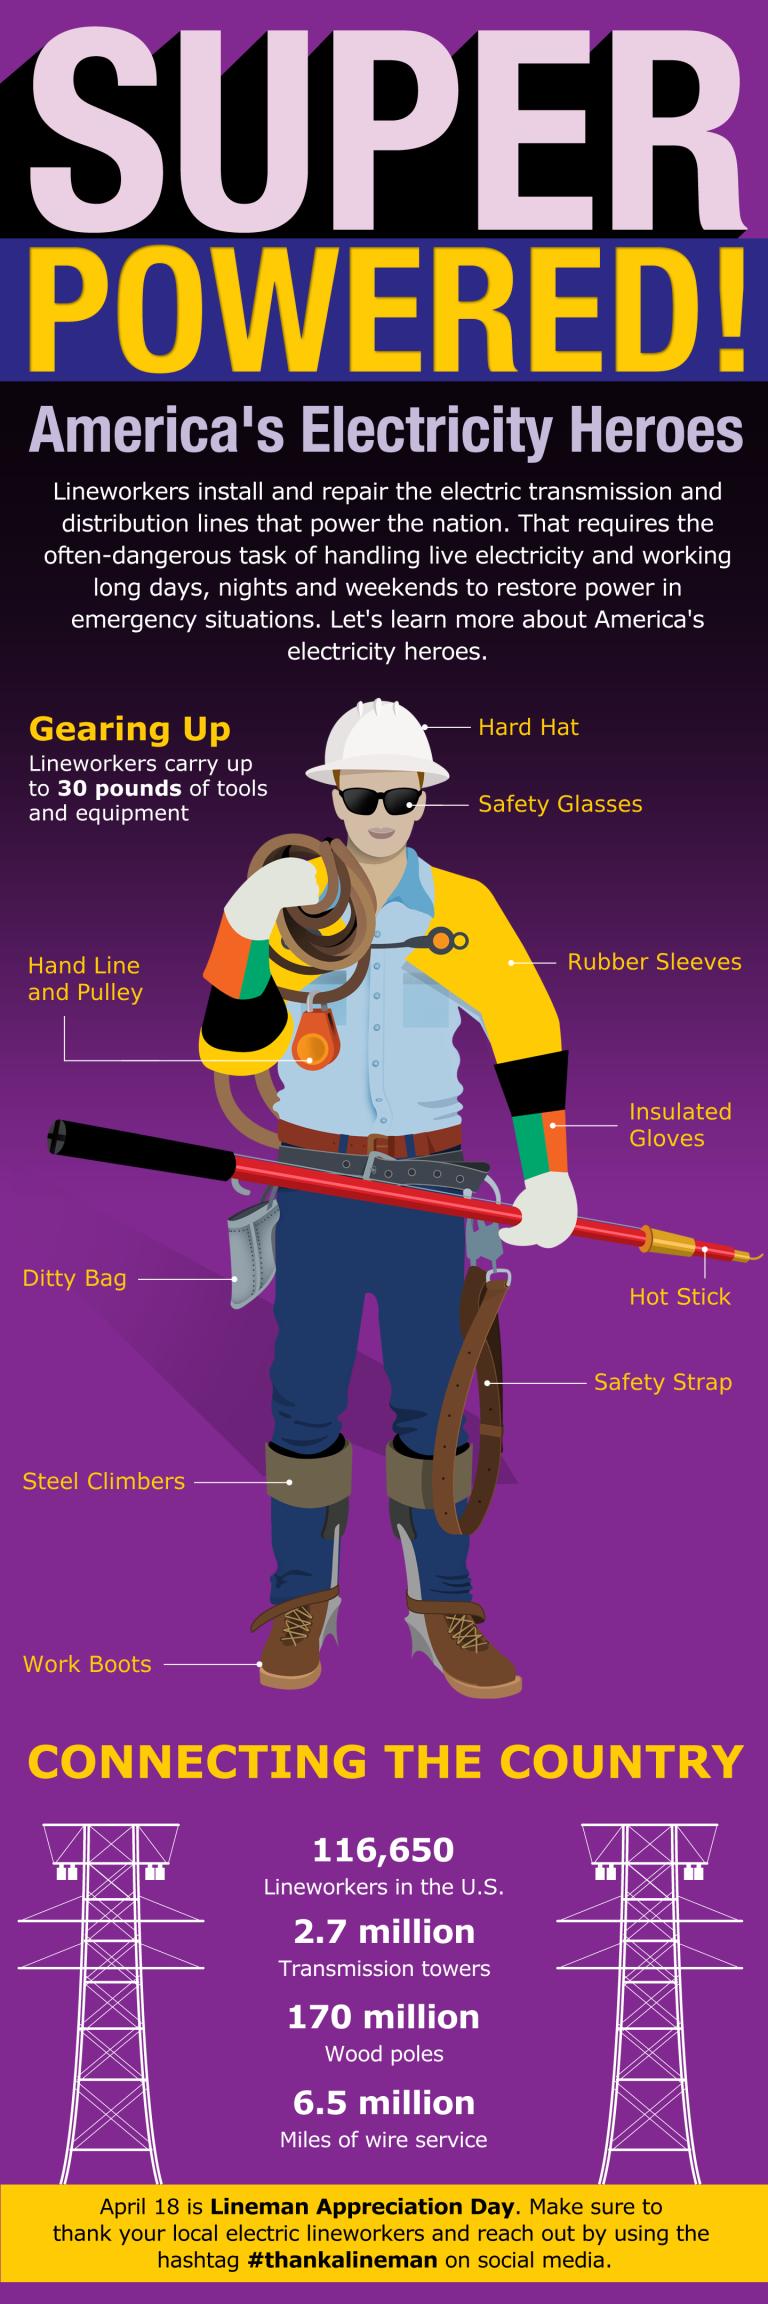 An illustration of a lineworker with the text: Super Powered! America’s Electricity Heroes.